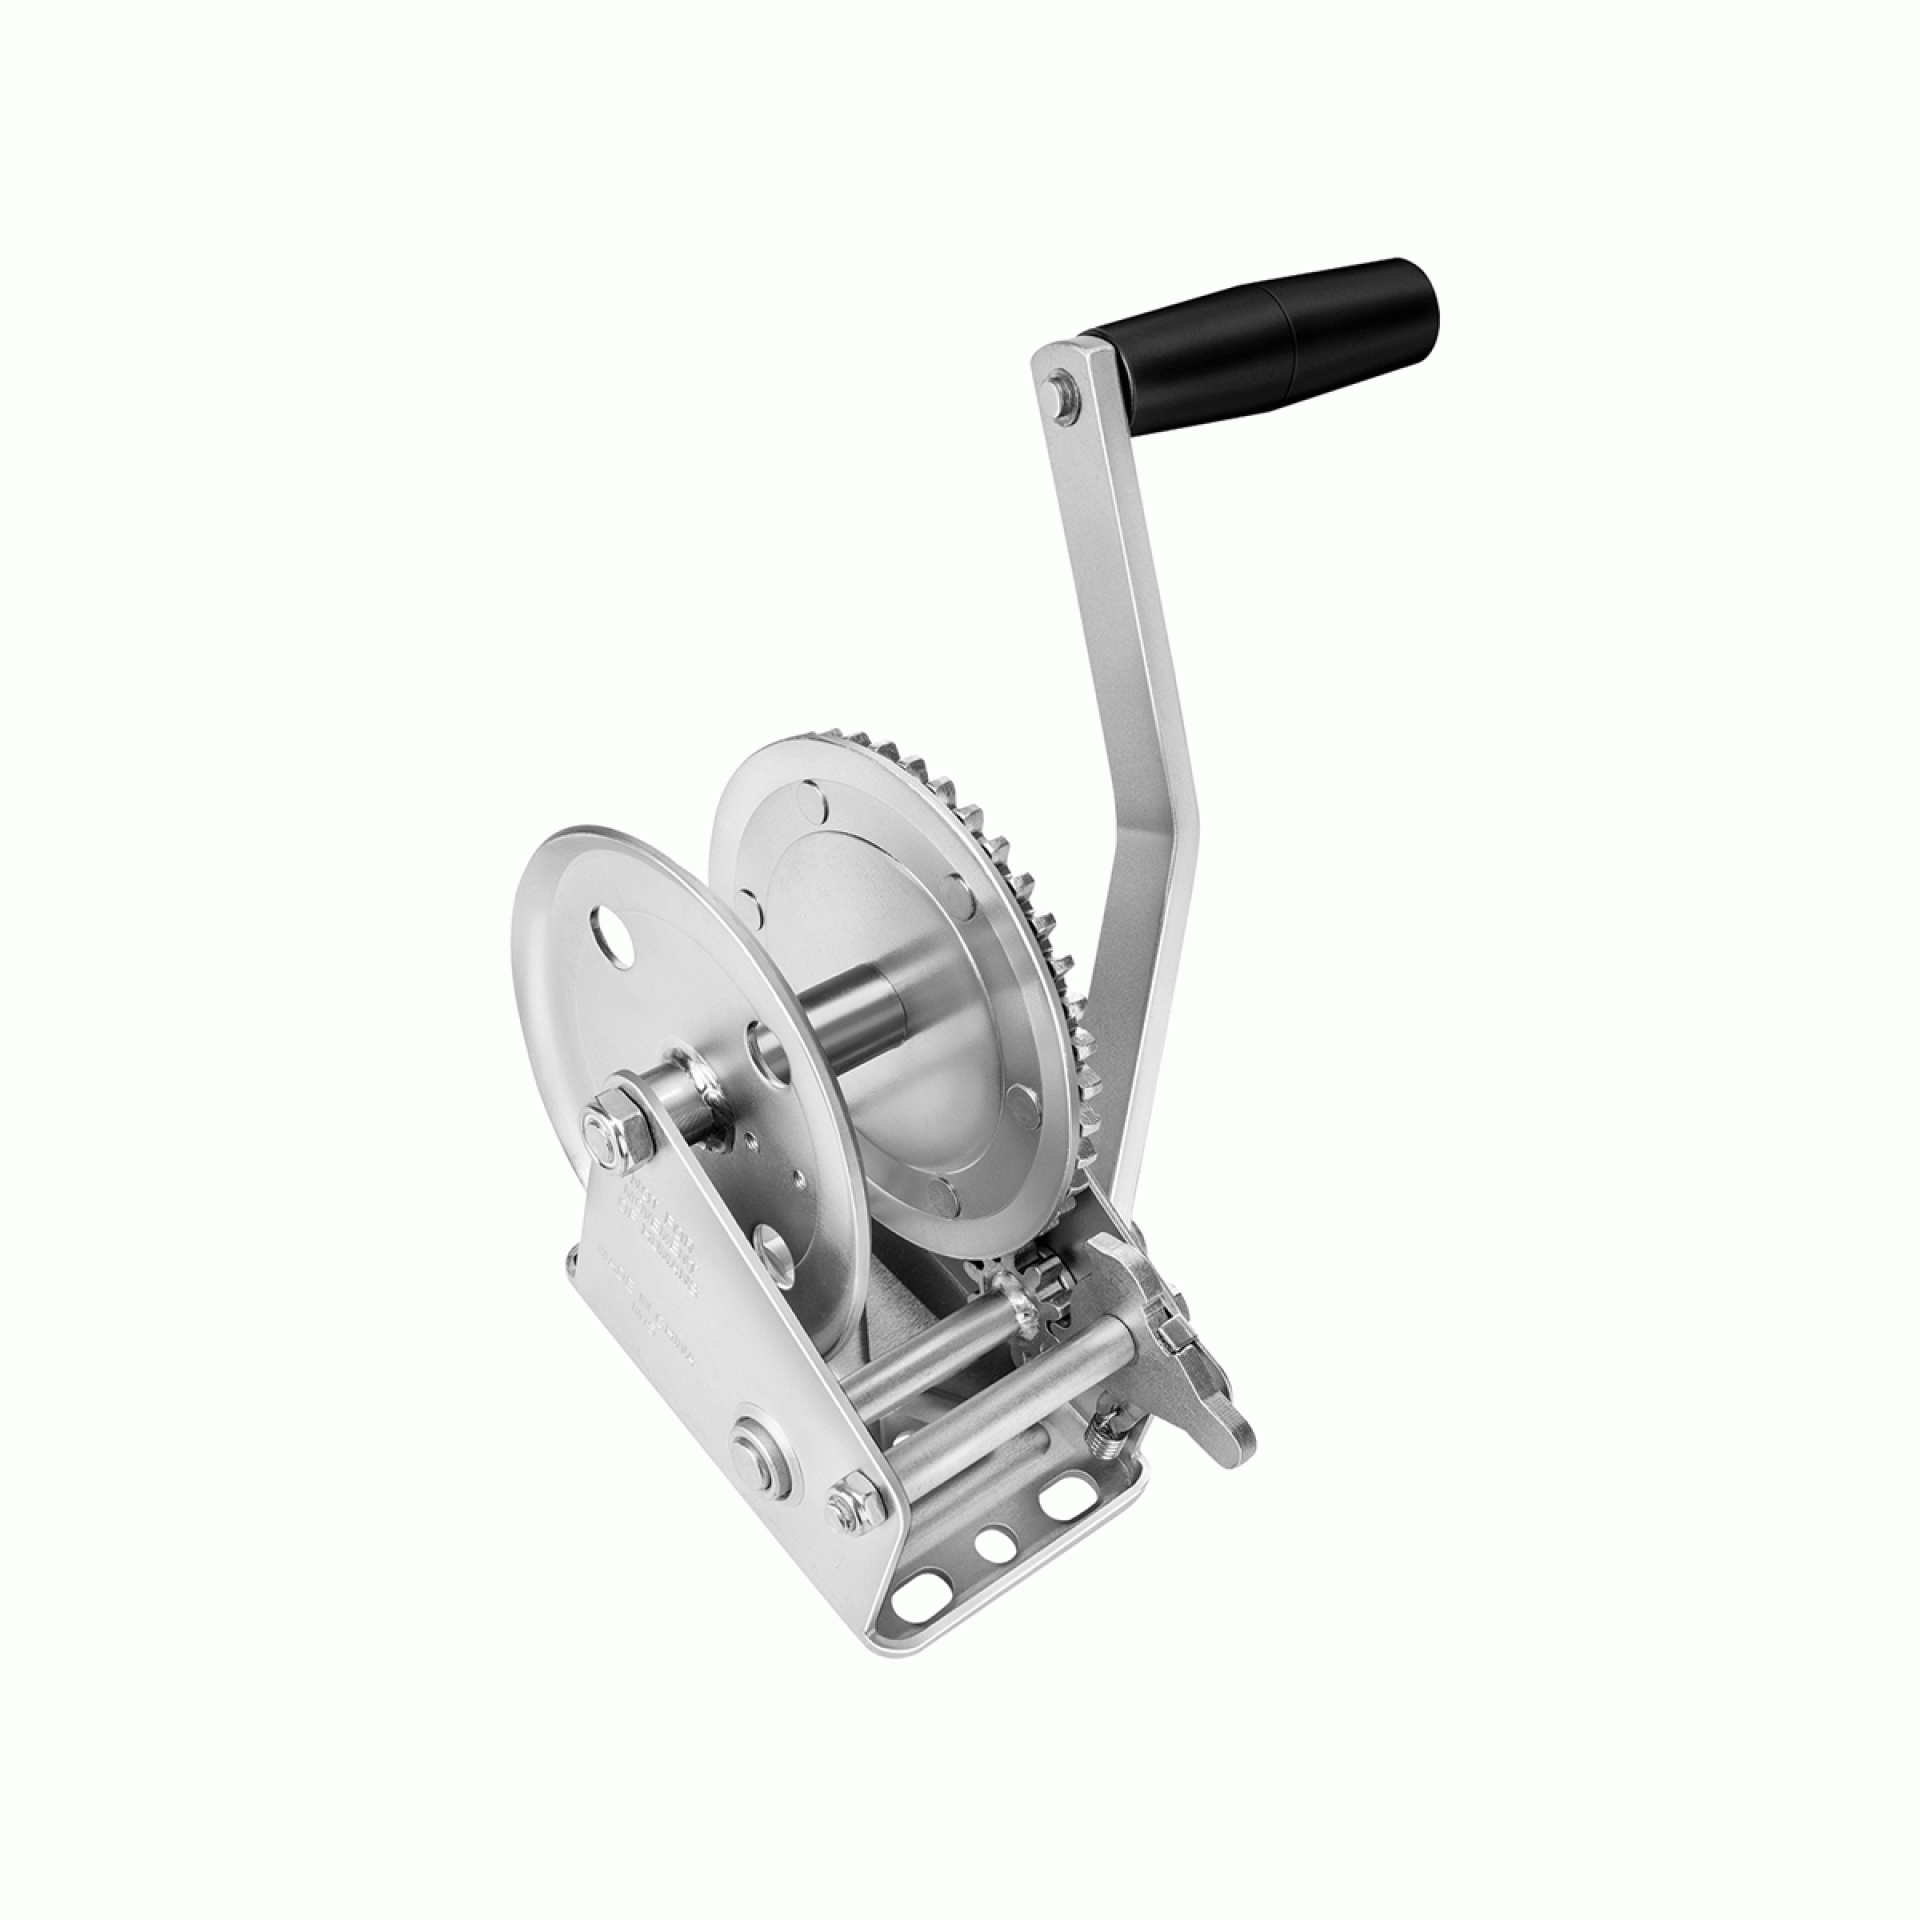 FULTON PERFORMANCE PRODUCTS | 142200 | SINGLE SPEED HAND WINCH 1500 LB